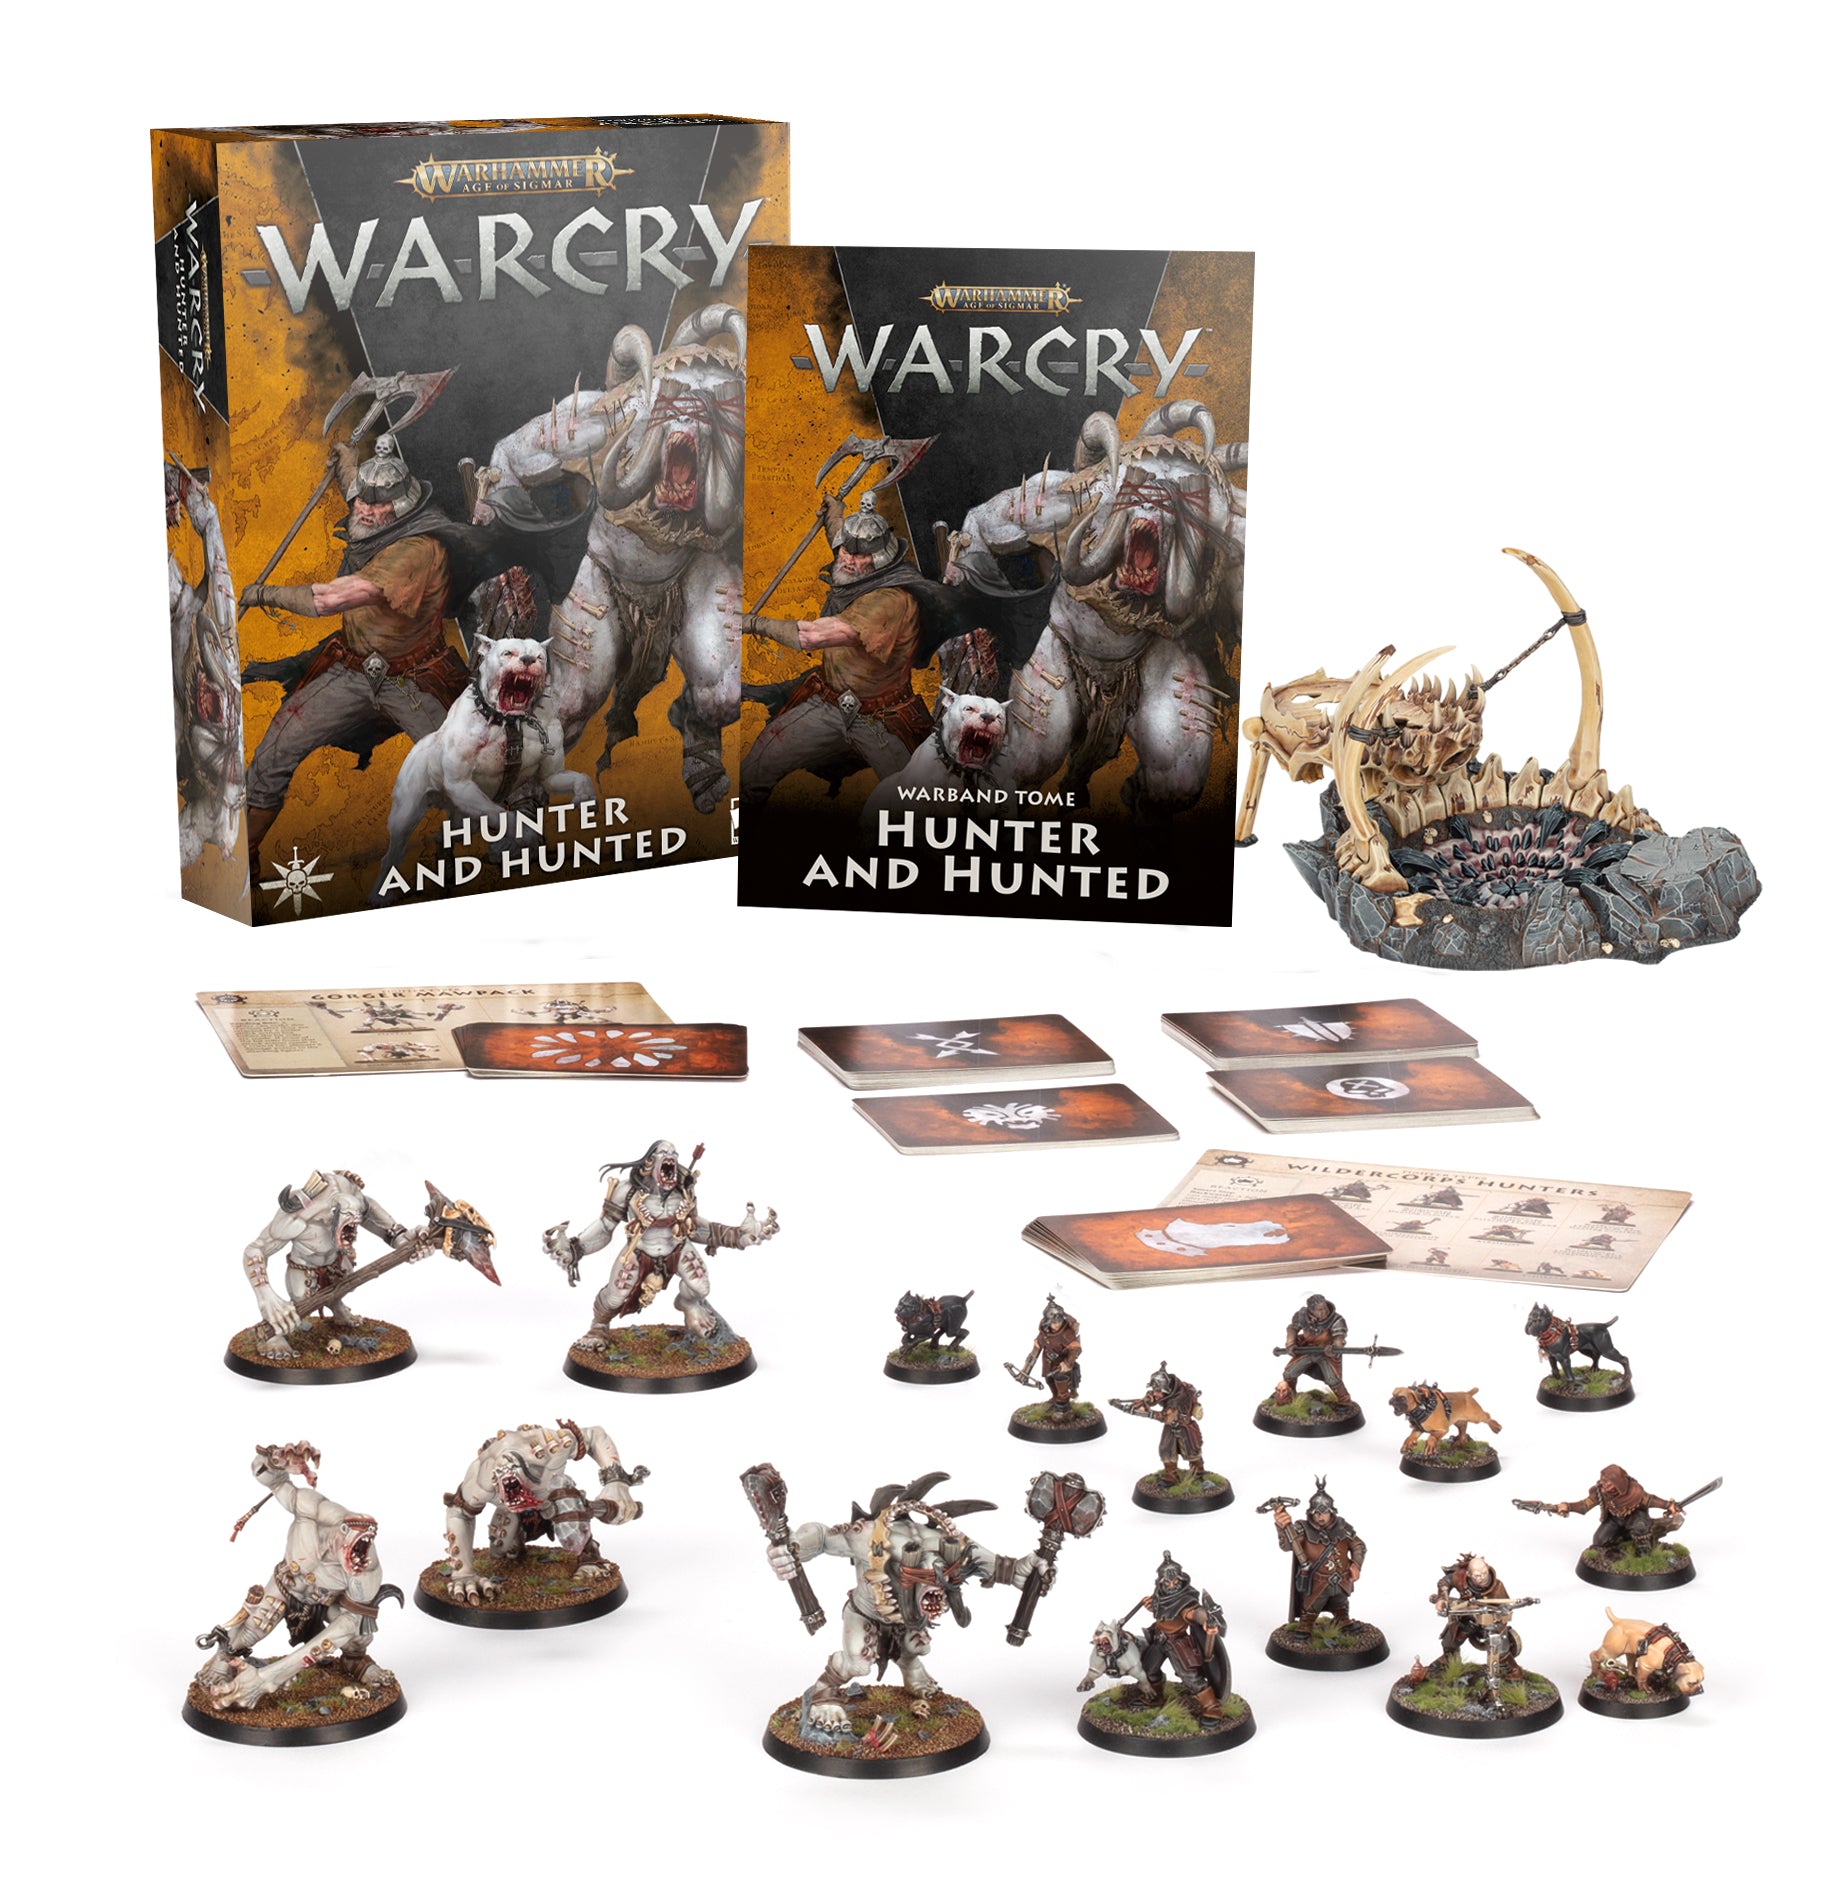 WARCRY: HUNTER AND HUNTED